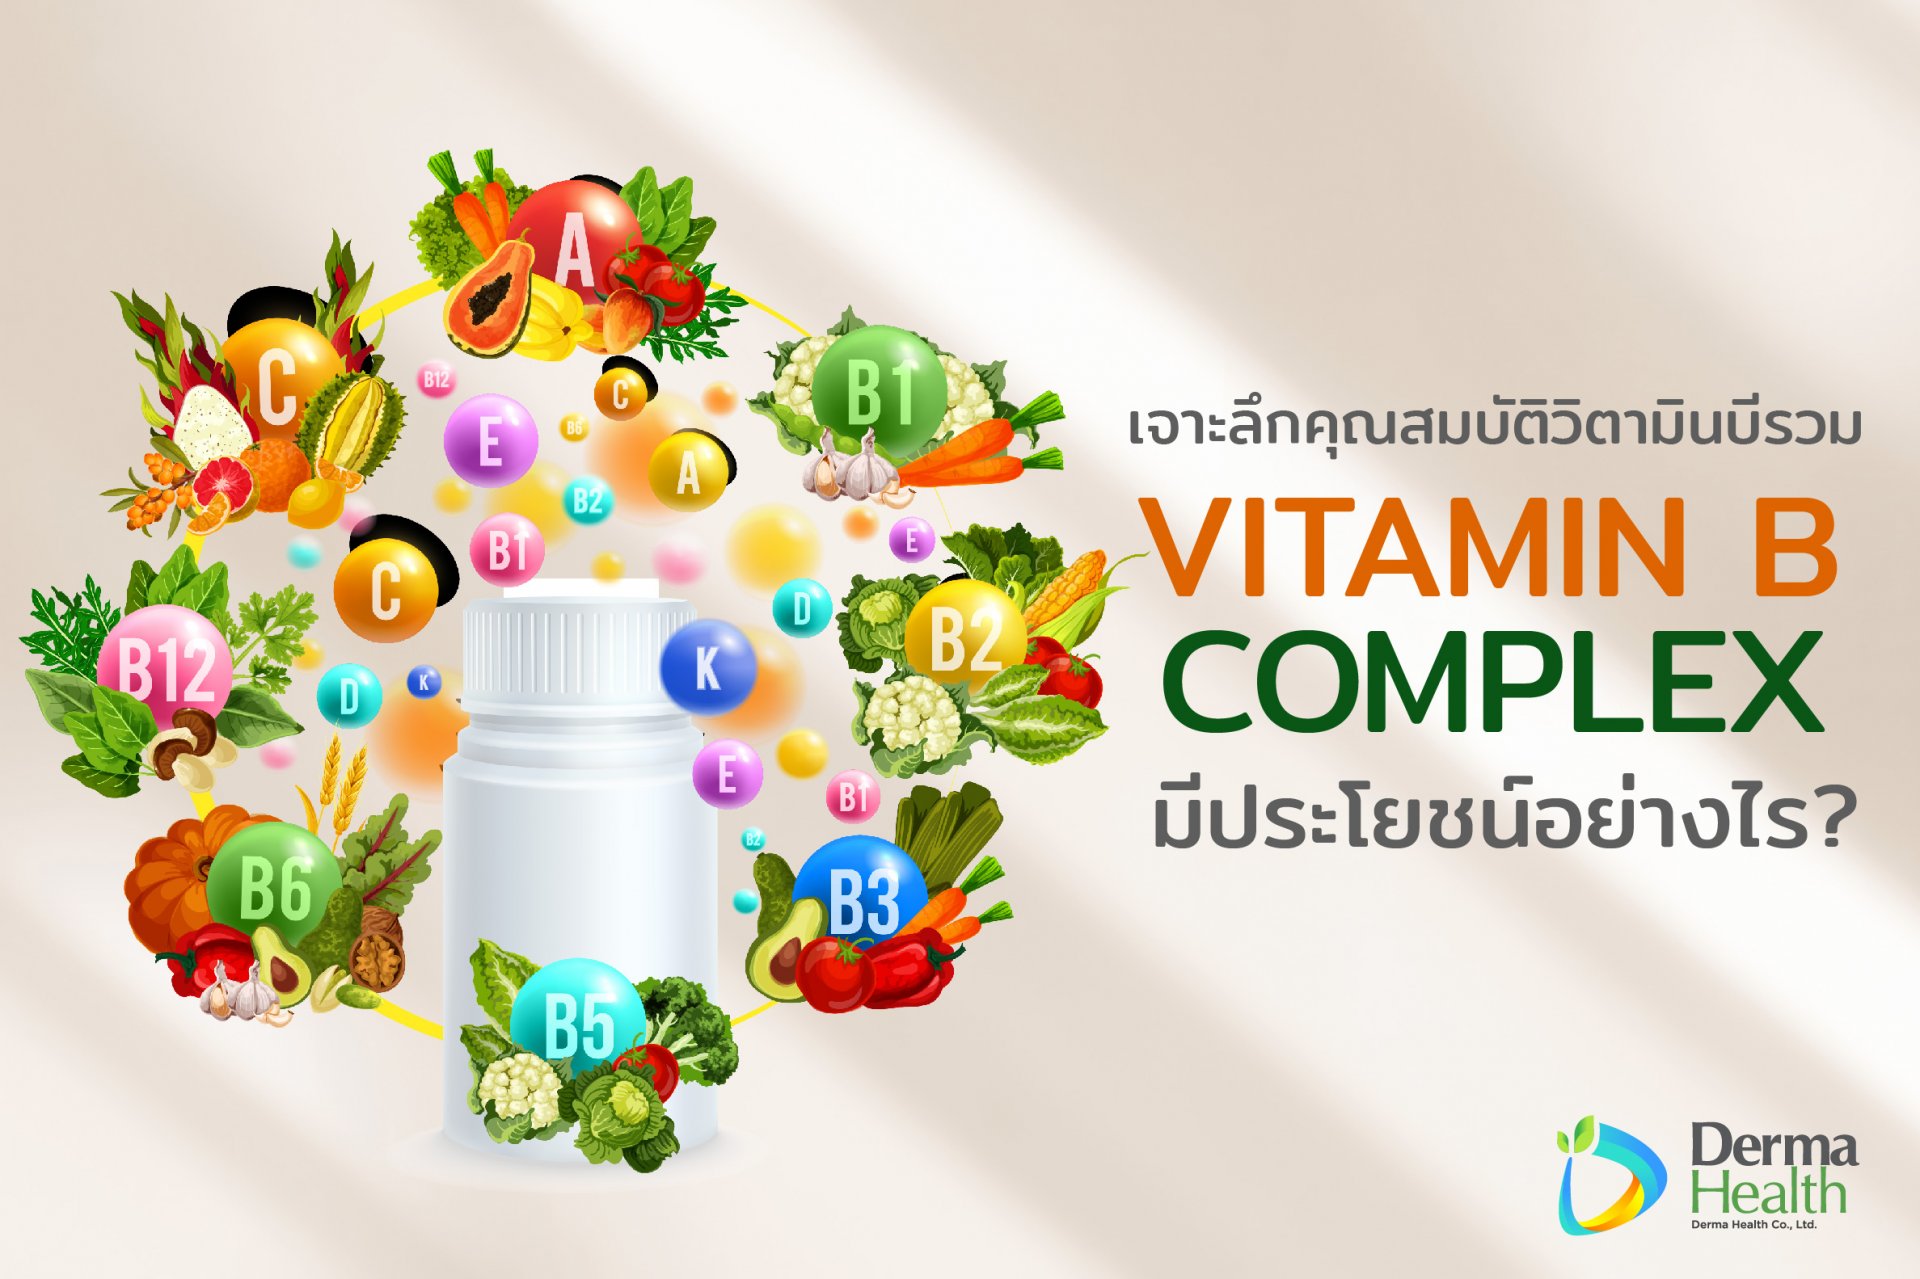 Delve into the properties of vitamin B complex. What are the benefits?